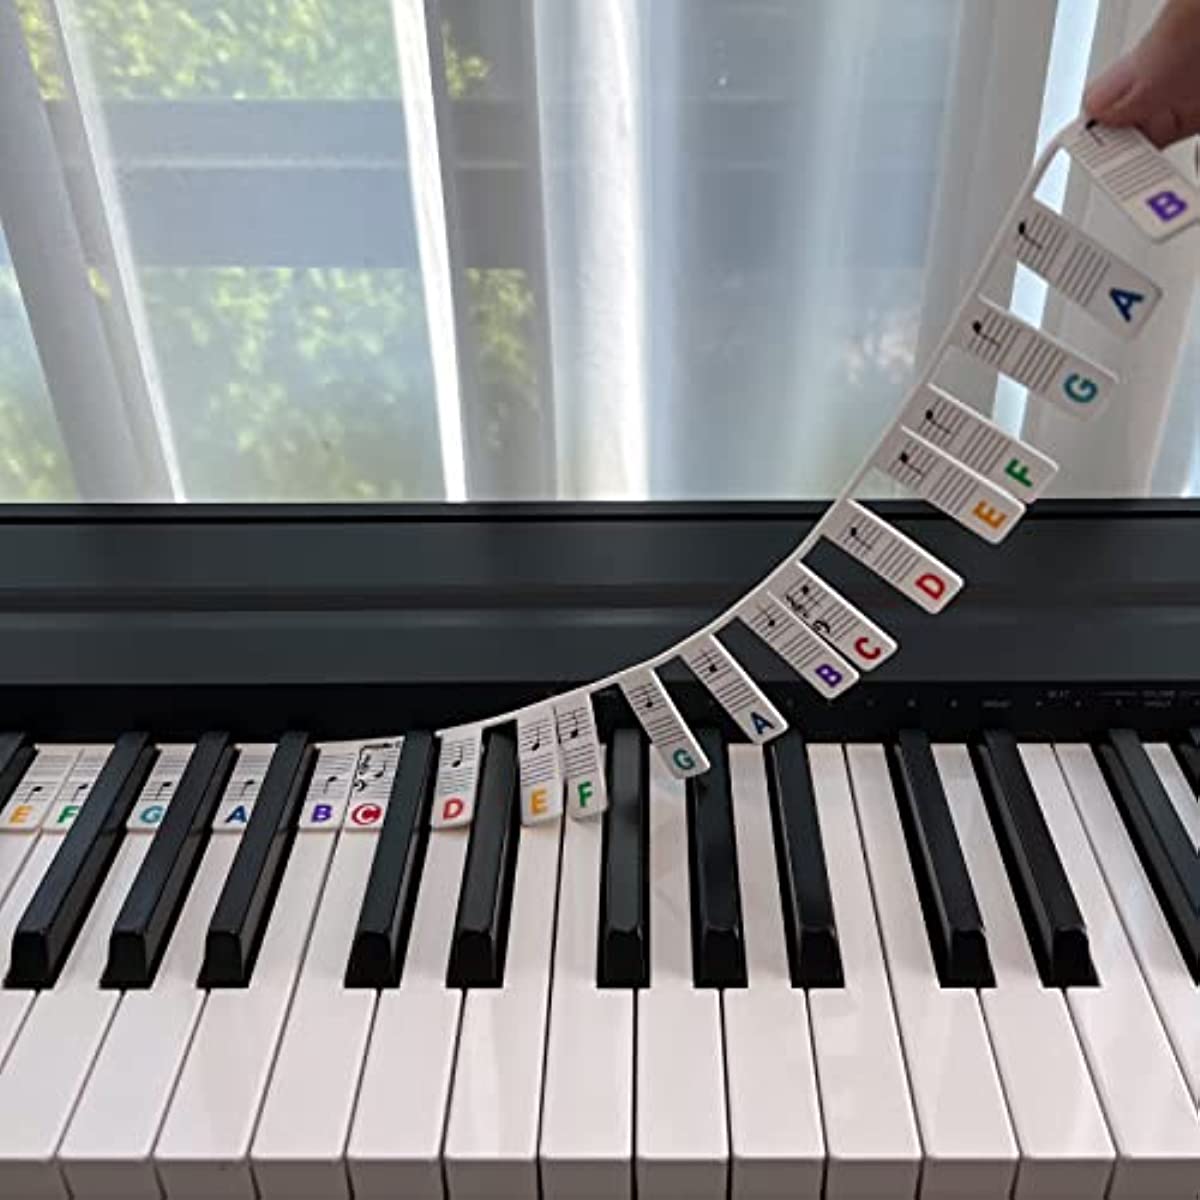 

Piano Notes Guide For Beginner, Removable Piano Keyboard Note Labels For Learning, 88-key Full Size, Made Of Silicone, No Need Stickers, Reusable